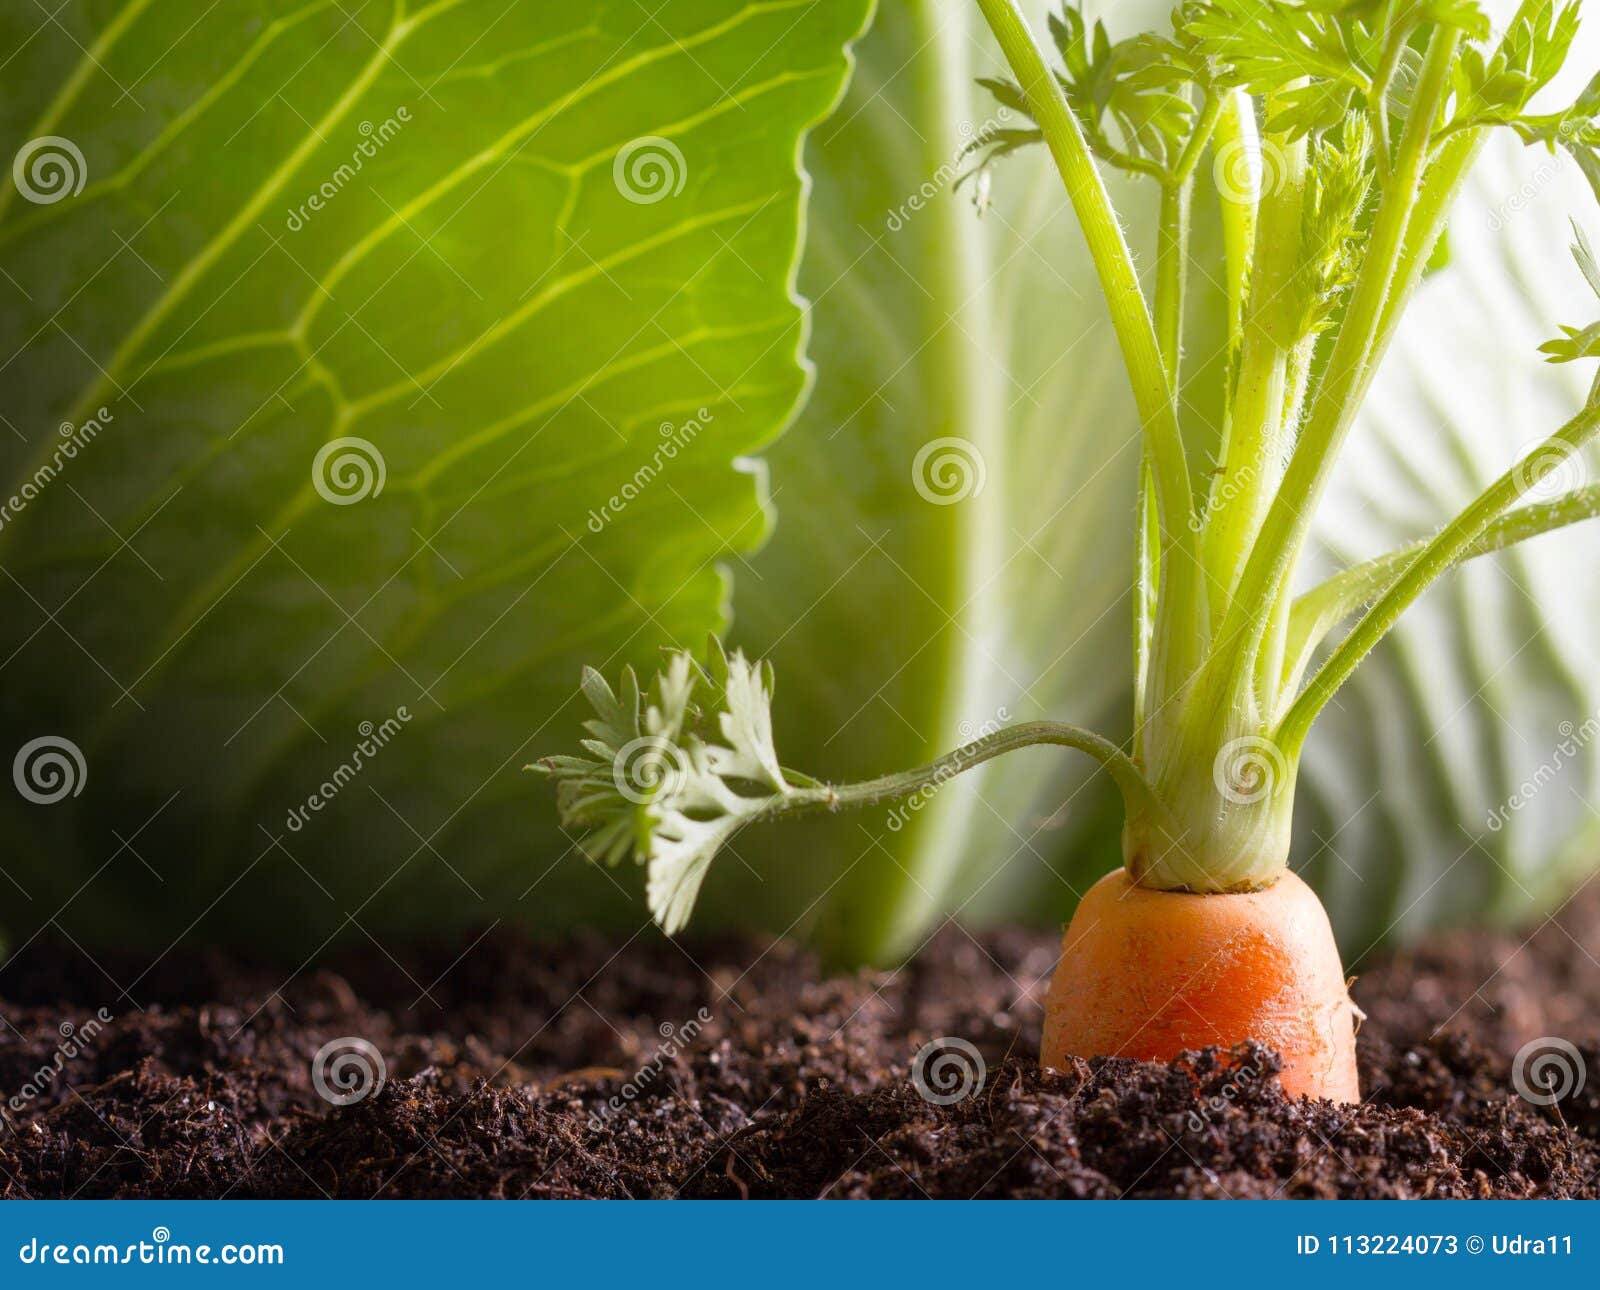 carrot vegetable grows in the garden in the soil organic background